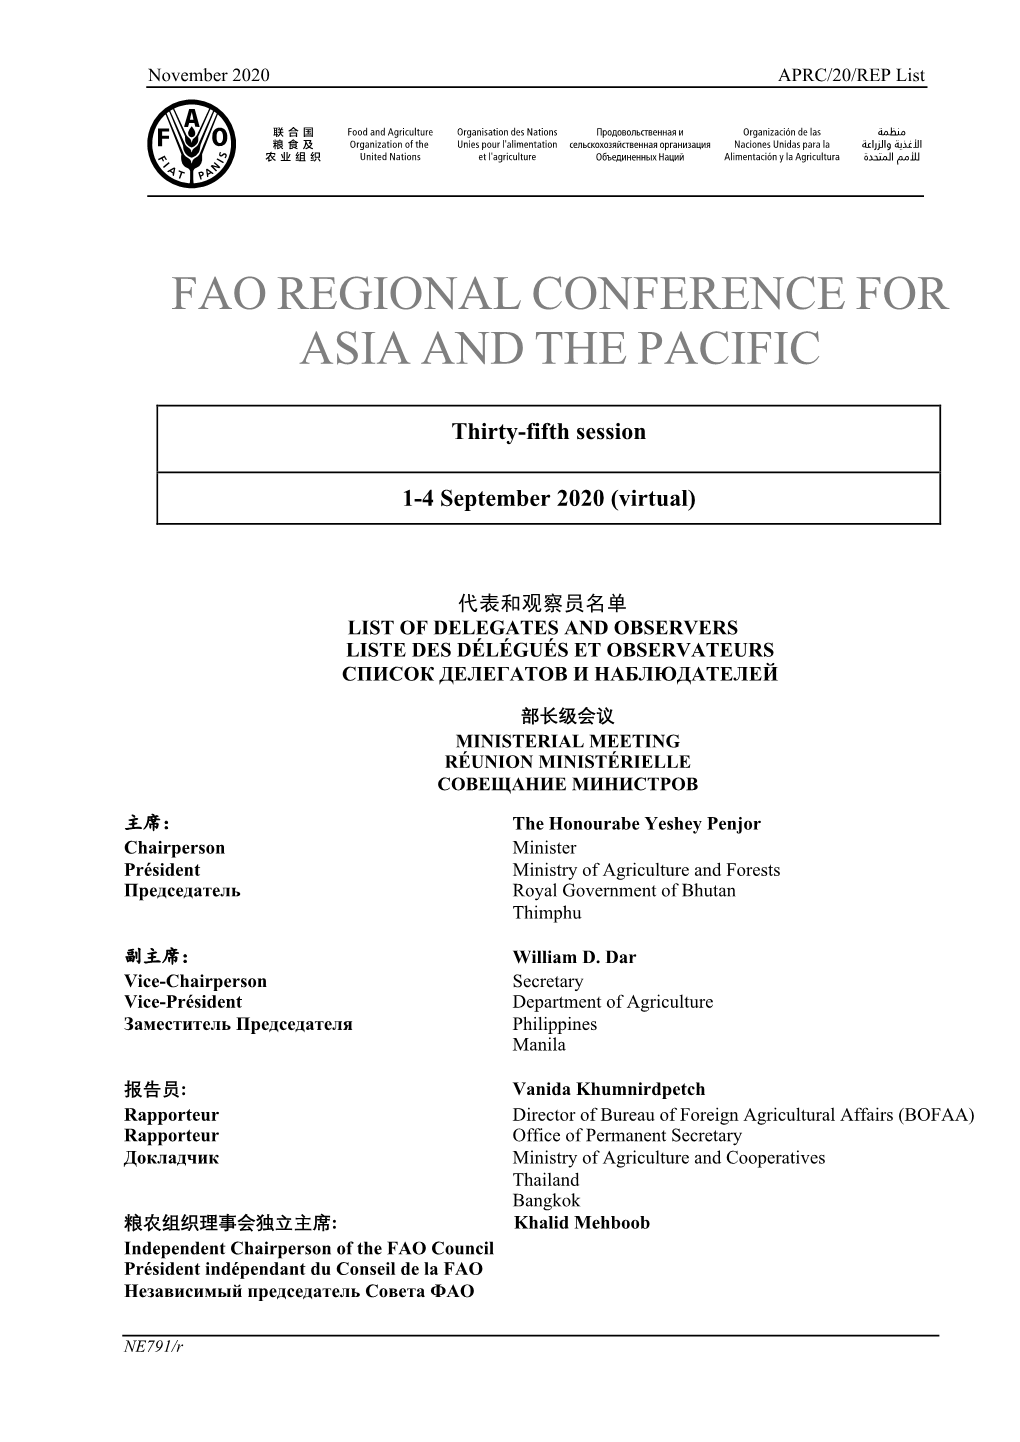 Fao Regional Conference for Asia and the Pacific